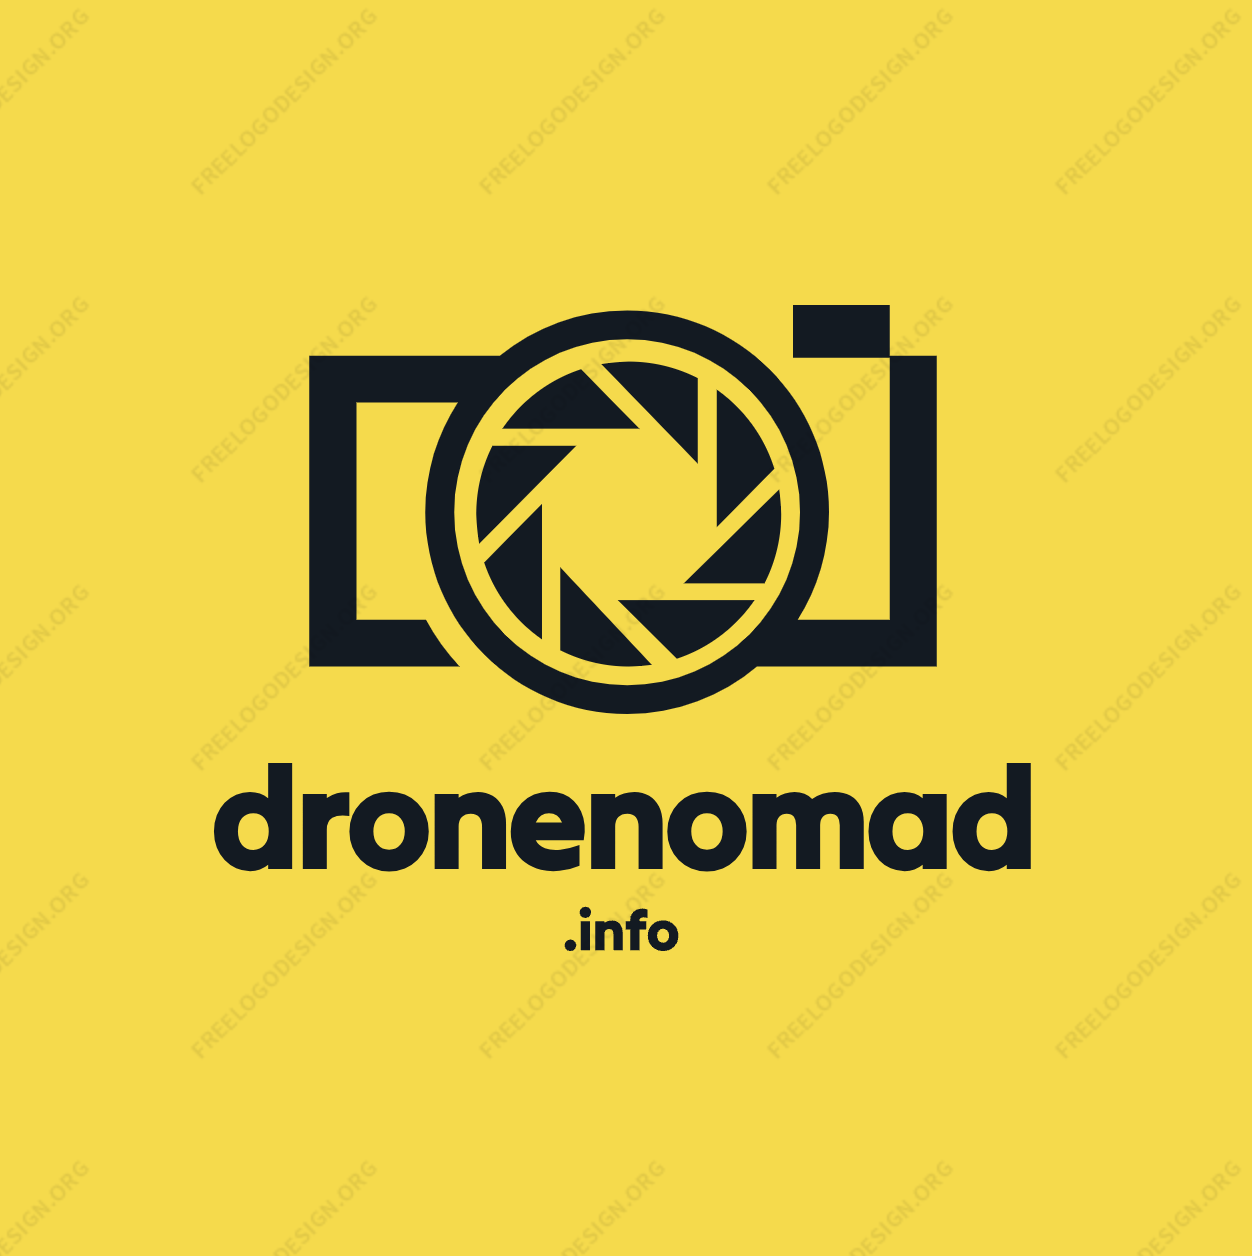 Drone Nomad